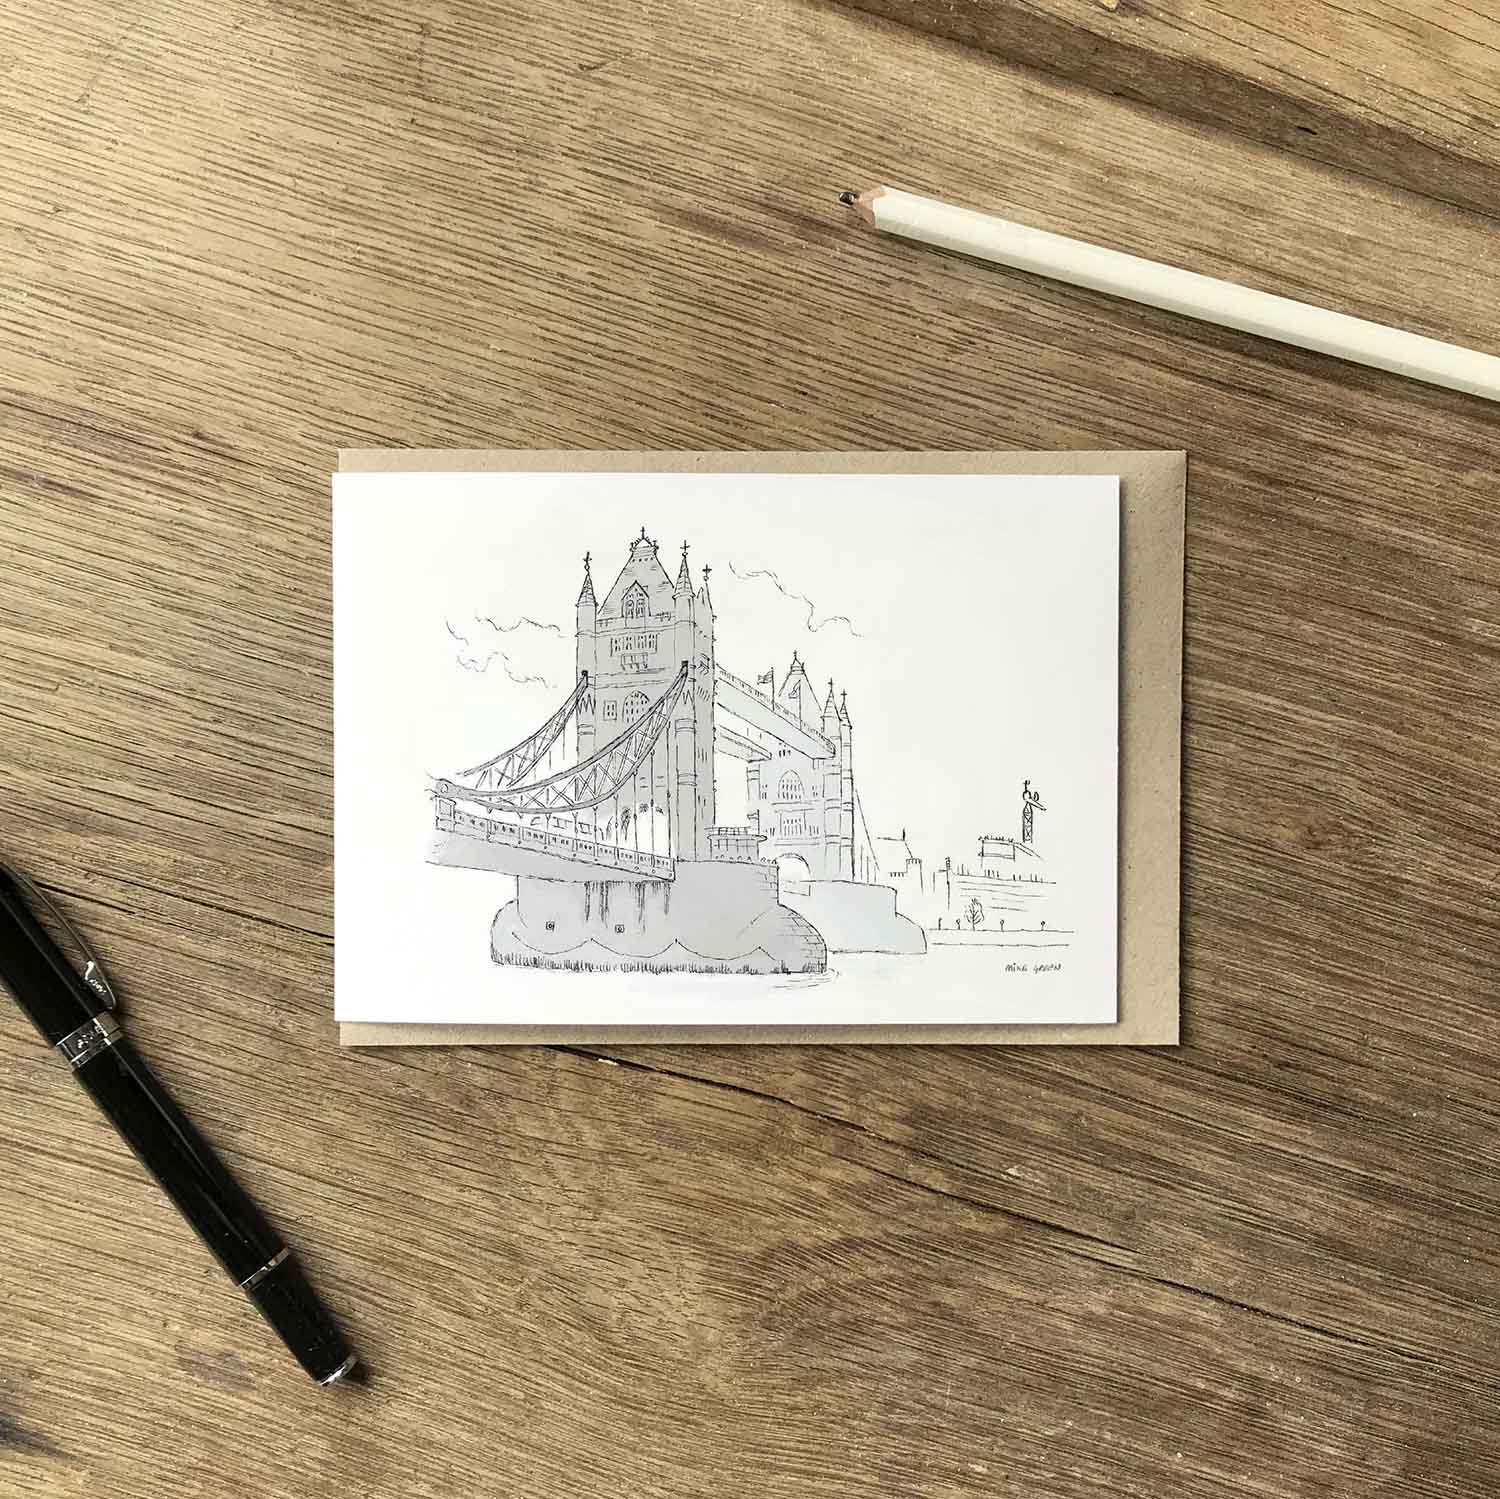 London's Tower Bridge beautifully sketched on a greeting card by mike green illustration.